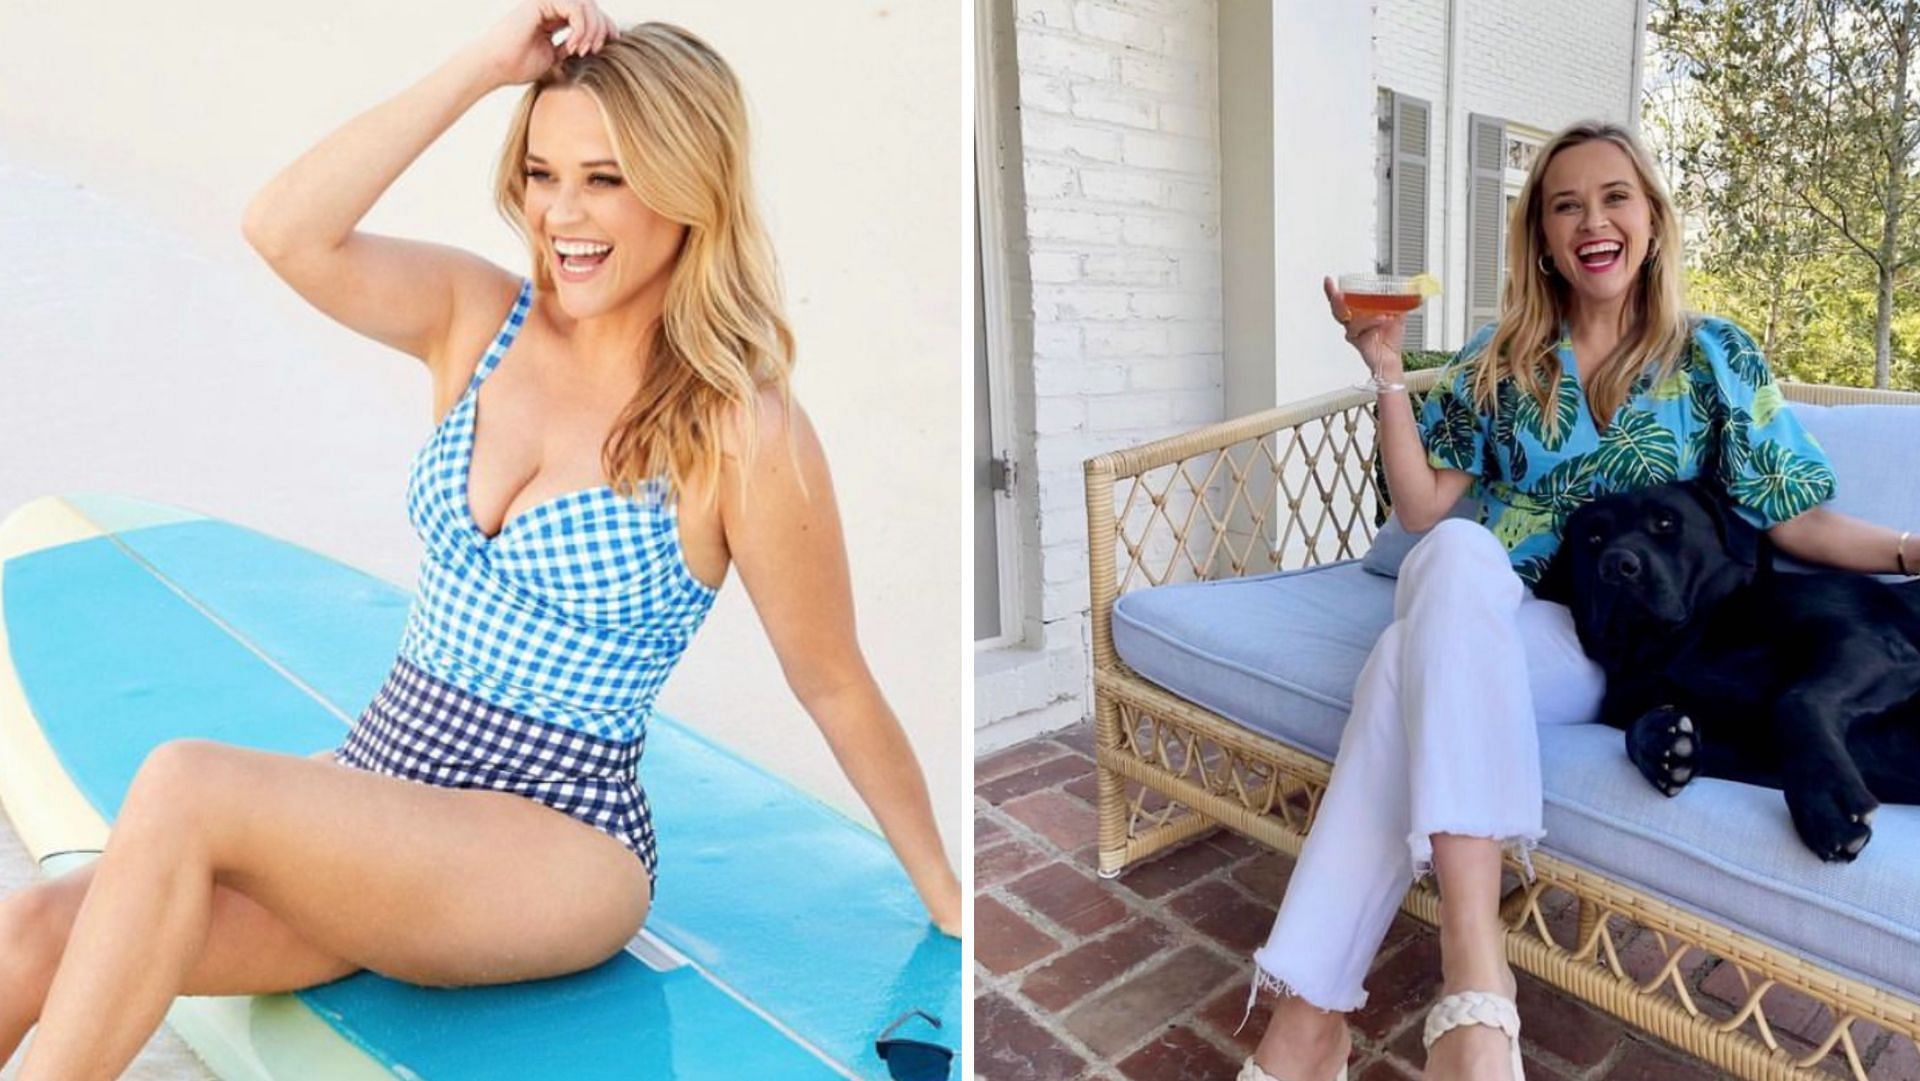 Reese Witherspoon swears by yoga before important events. (Photos via Instagram/reesewitherspoon)